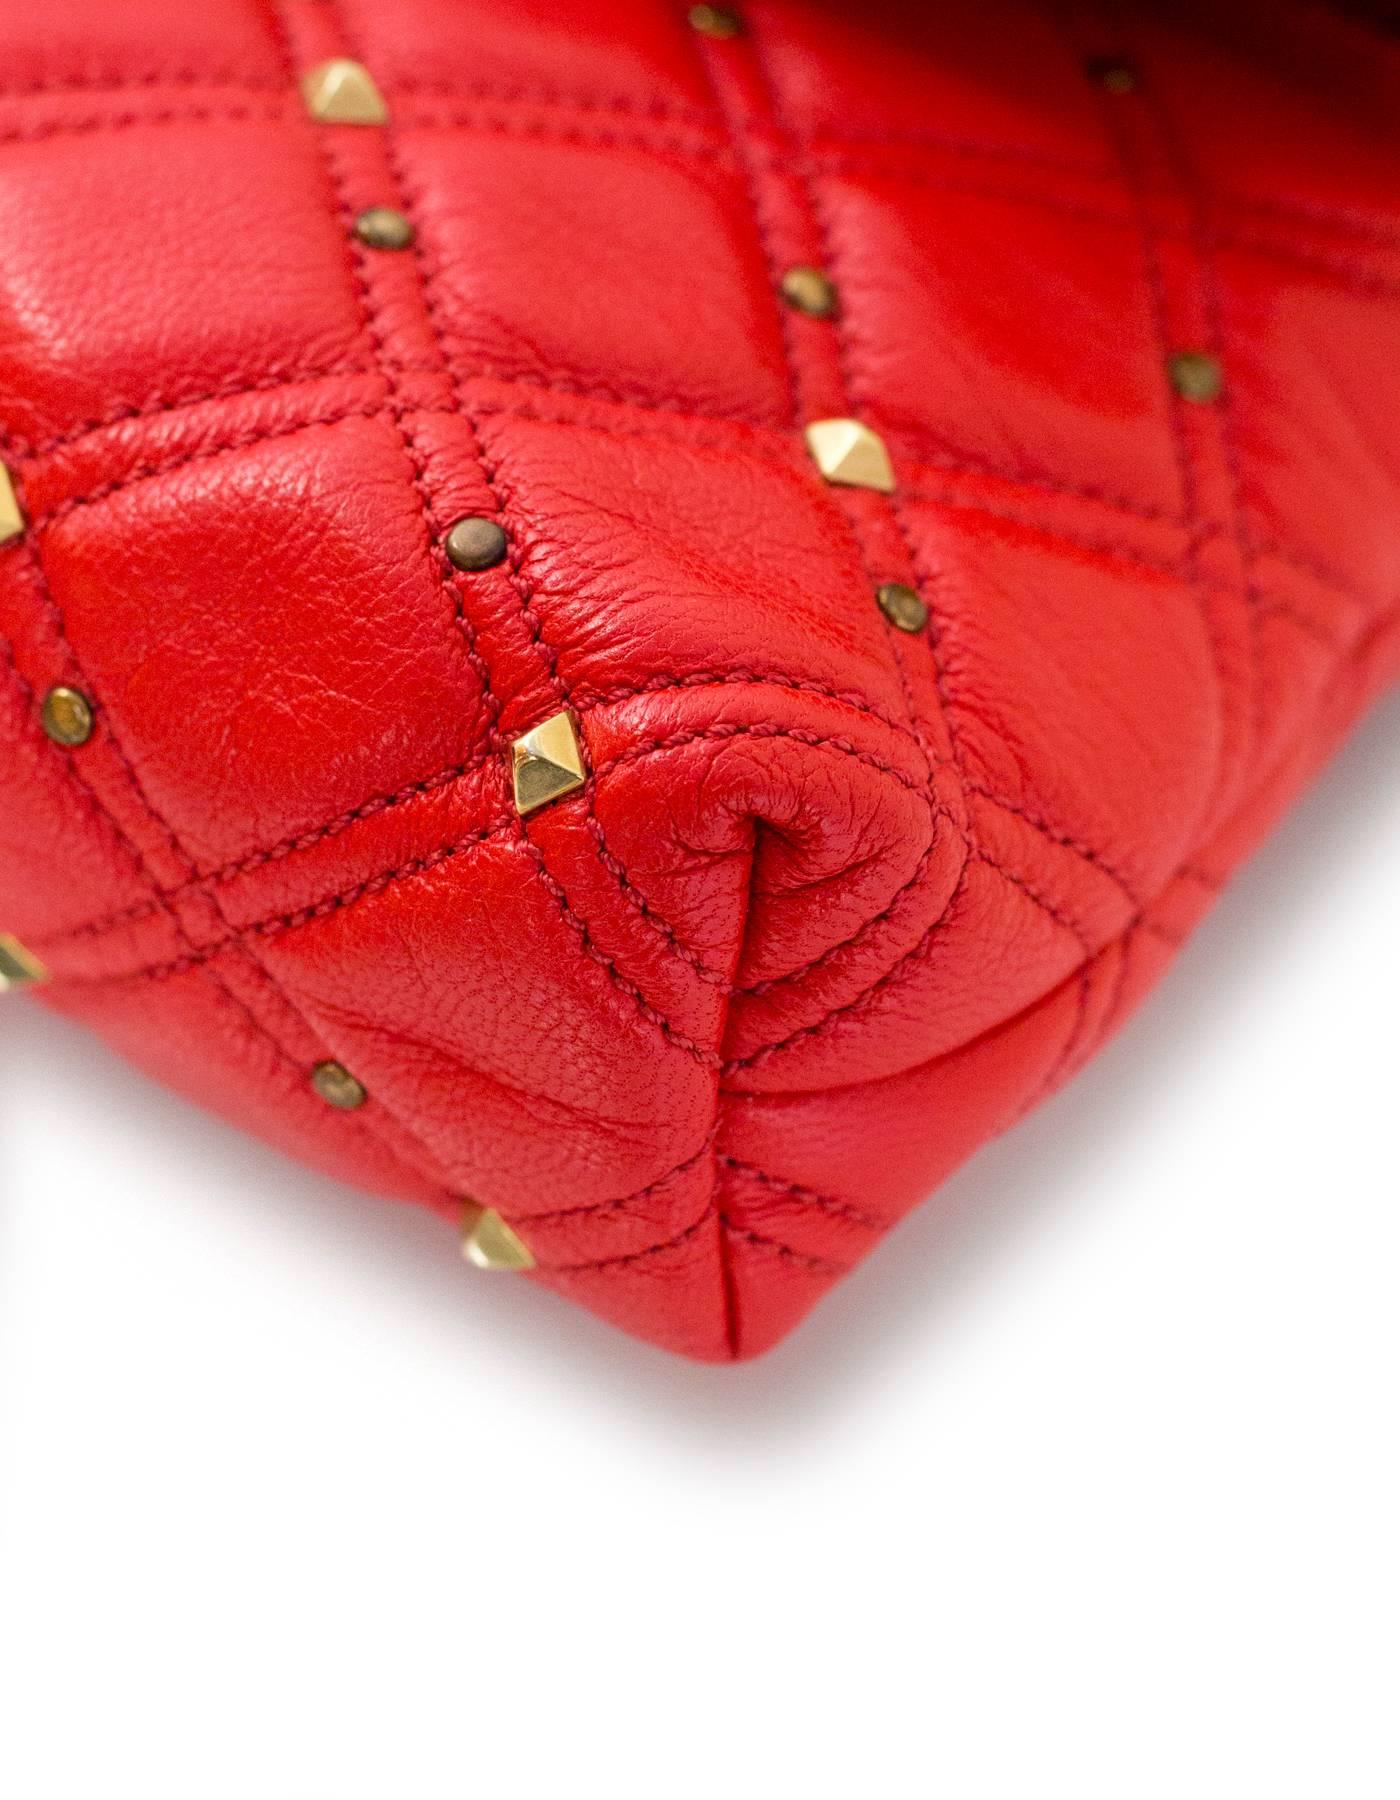 Women's Marc Jacobs Red Leather Studded Crossbody Bag with DB